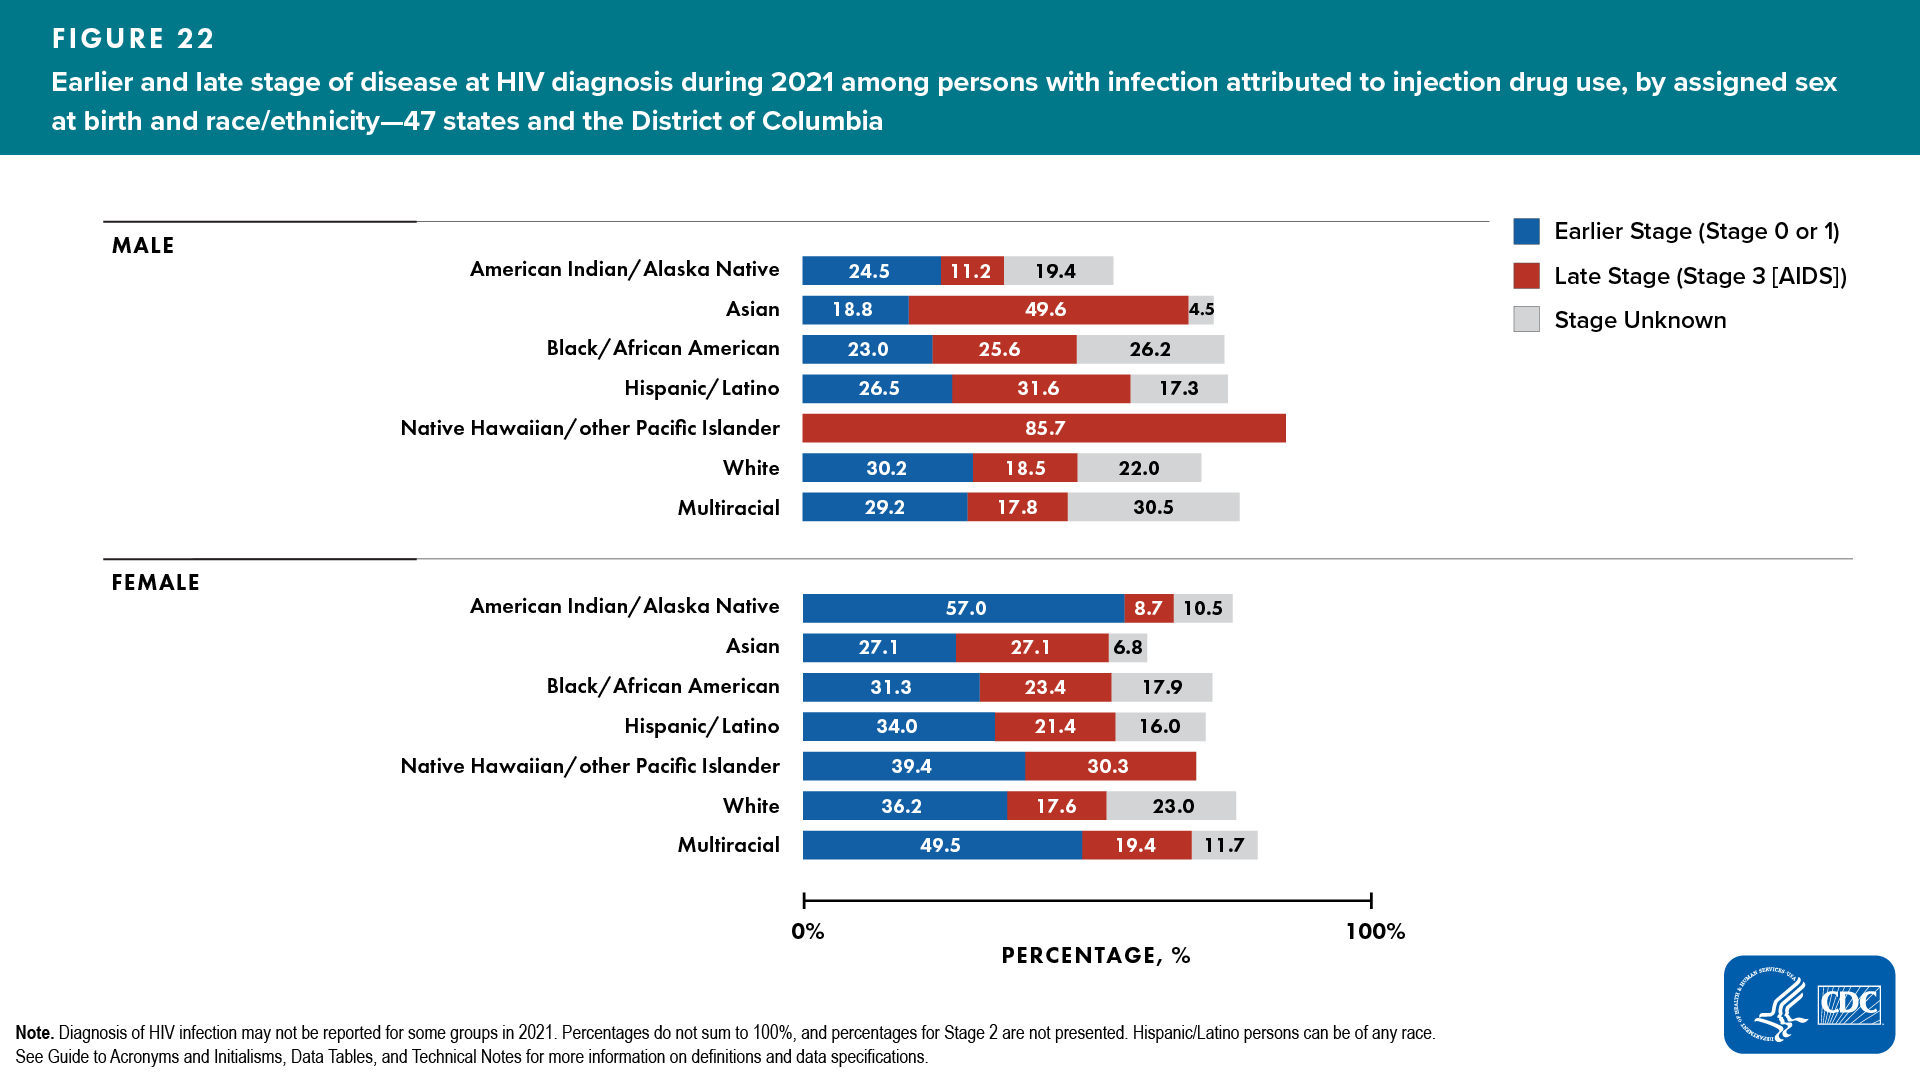 Figure 22. Earlier and late stage of disease at HIV diagnosis during 2021 among persons with infection attributed to injection drug use, by assigned sex at birth and race/ethnicity — 47 states and the District of Columbia